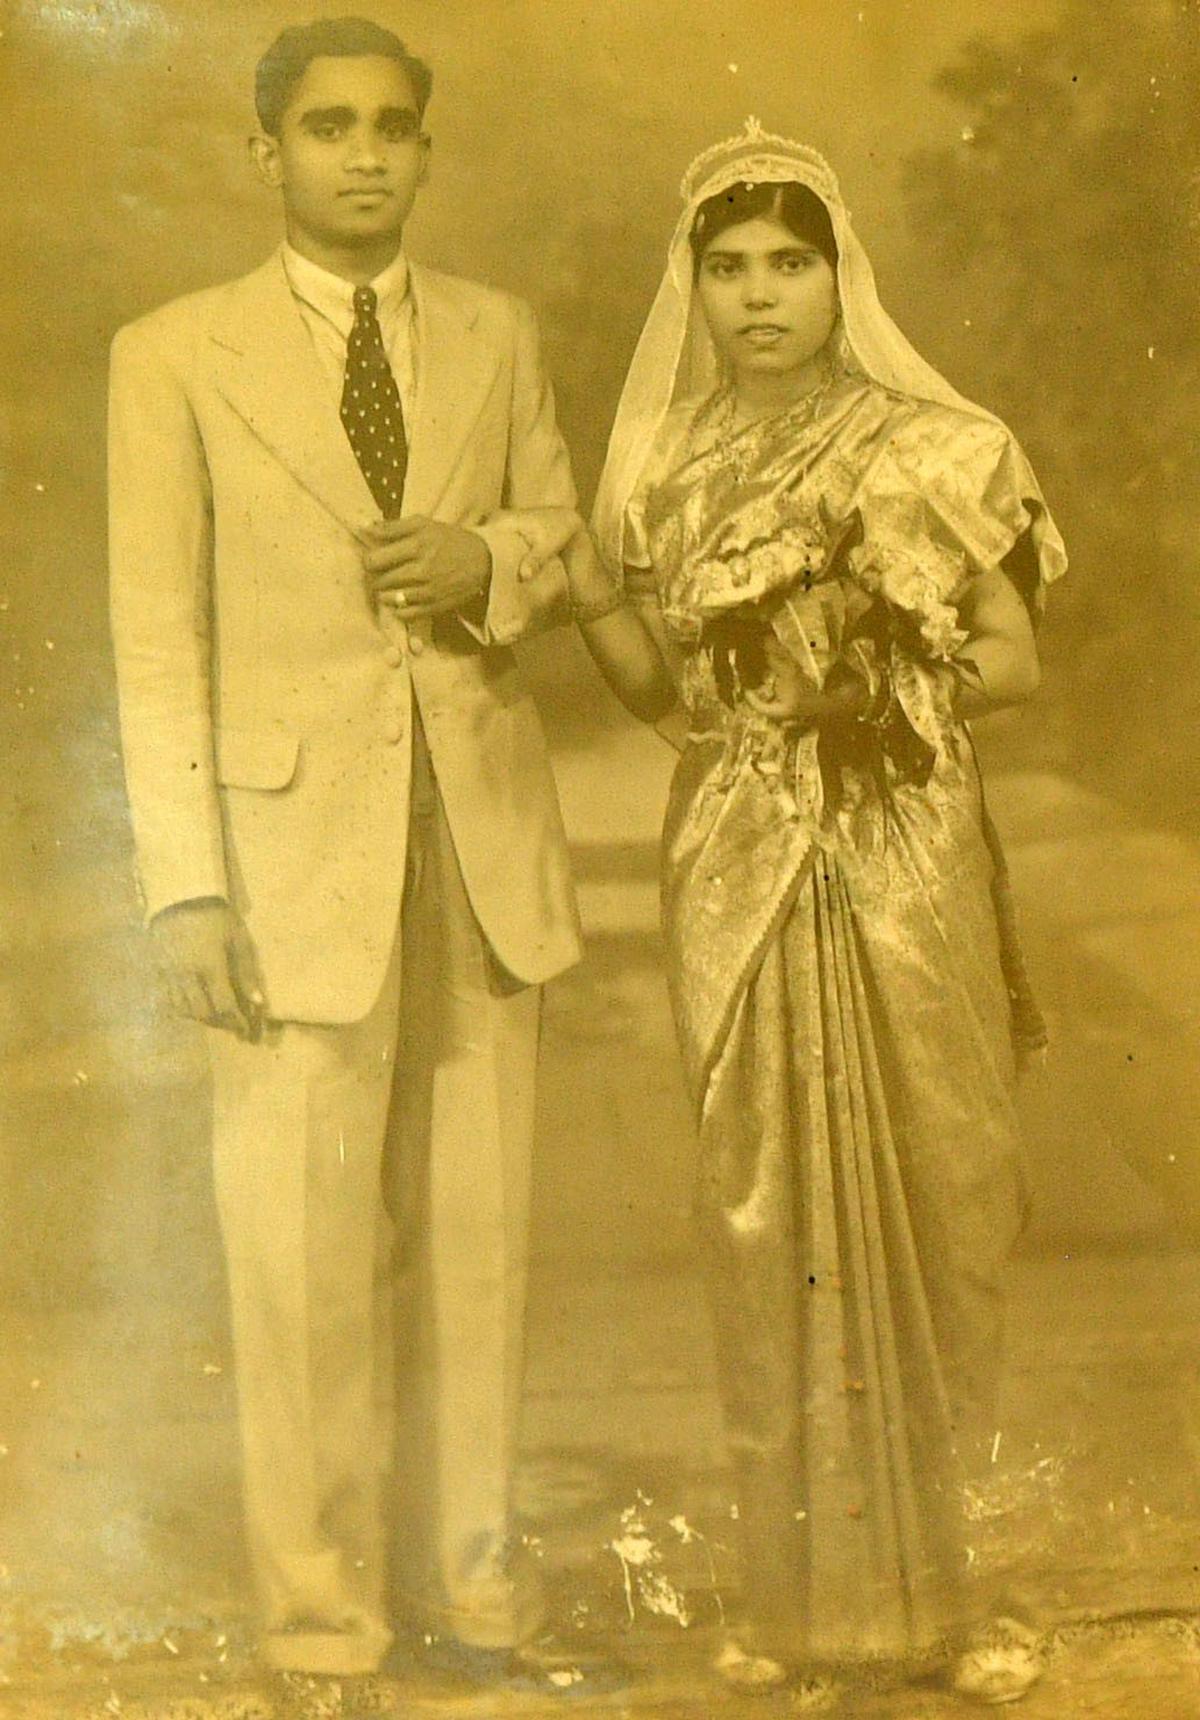 A. Ignatius Muthu and Marie Antoinette as newlyweds in 1948.